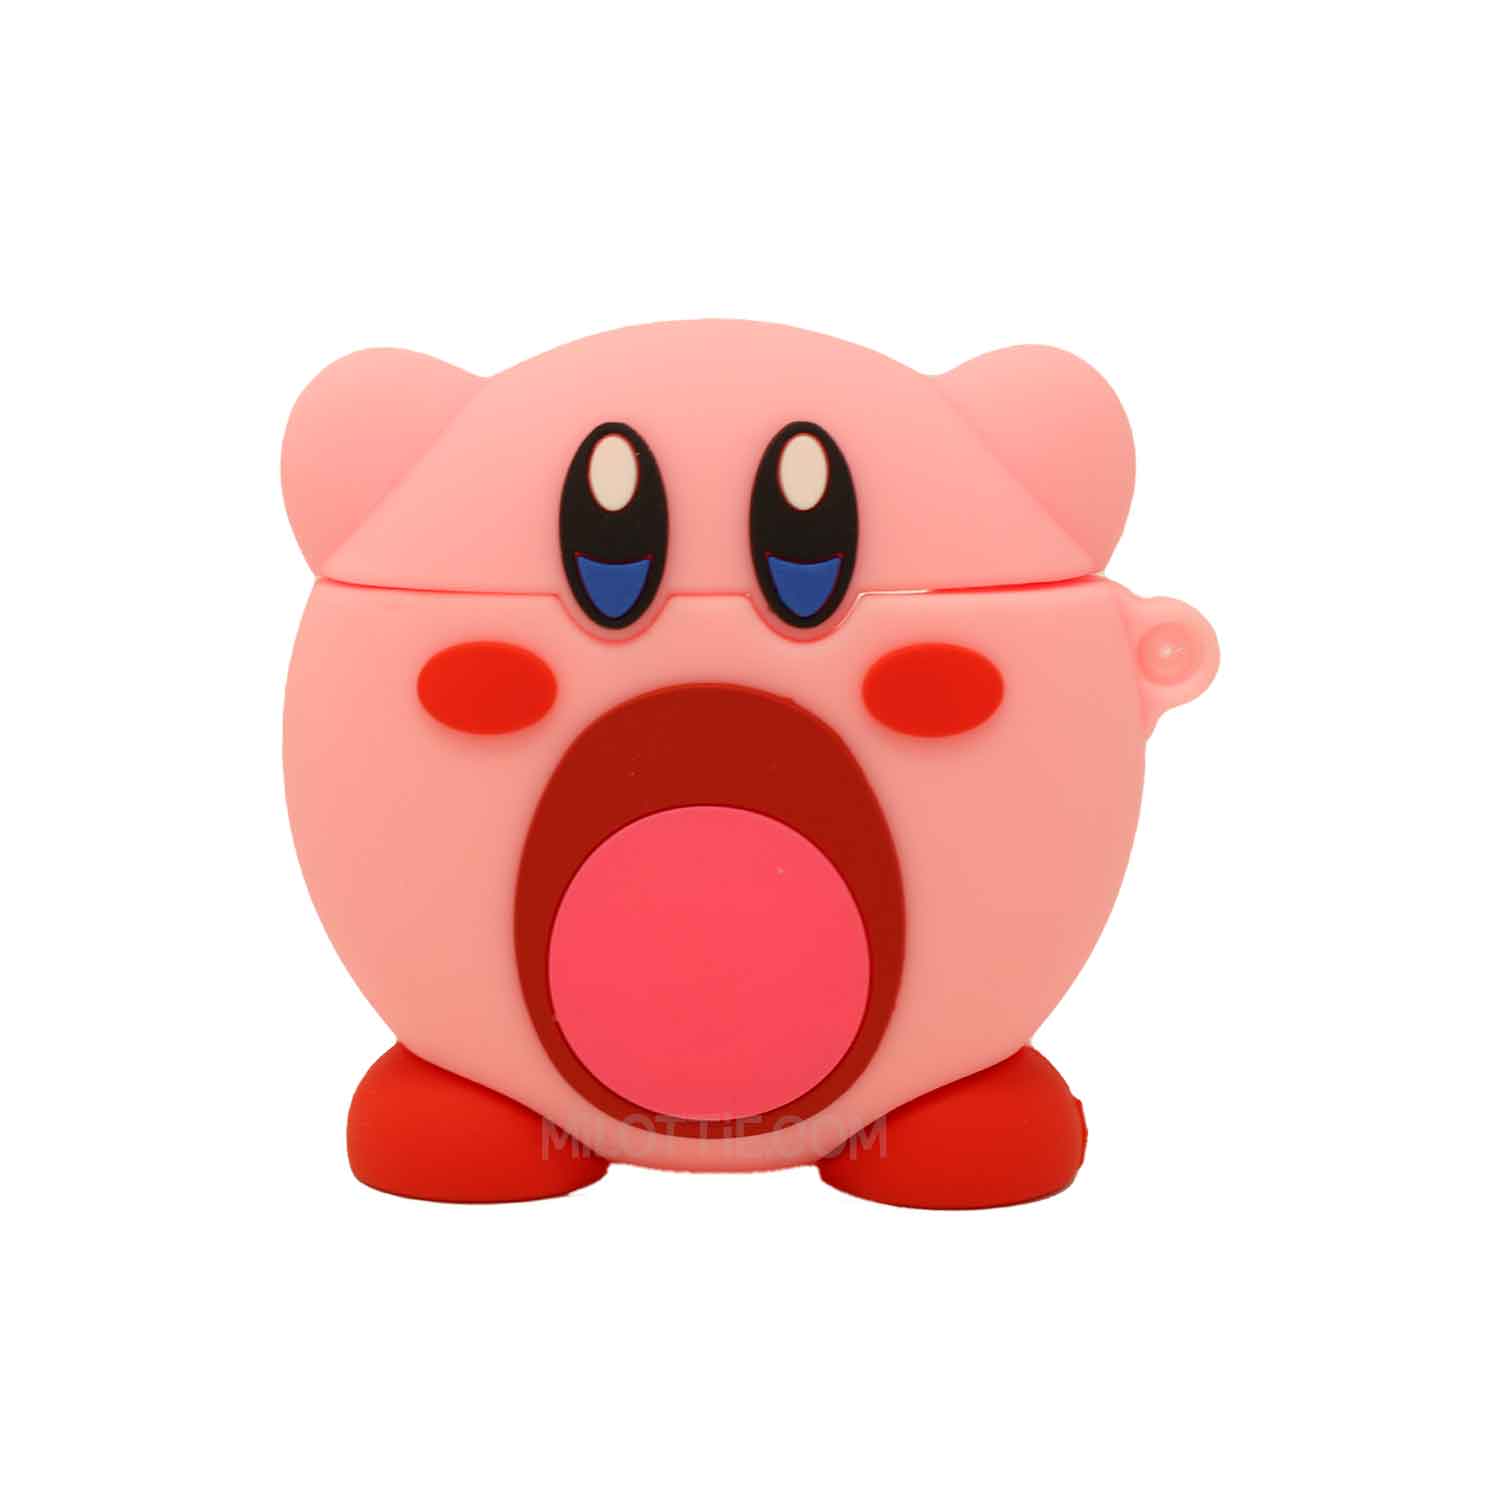 Kirby Open Mouth Inhaling Apple Airpods & AirPods Pro Case